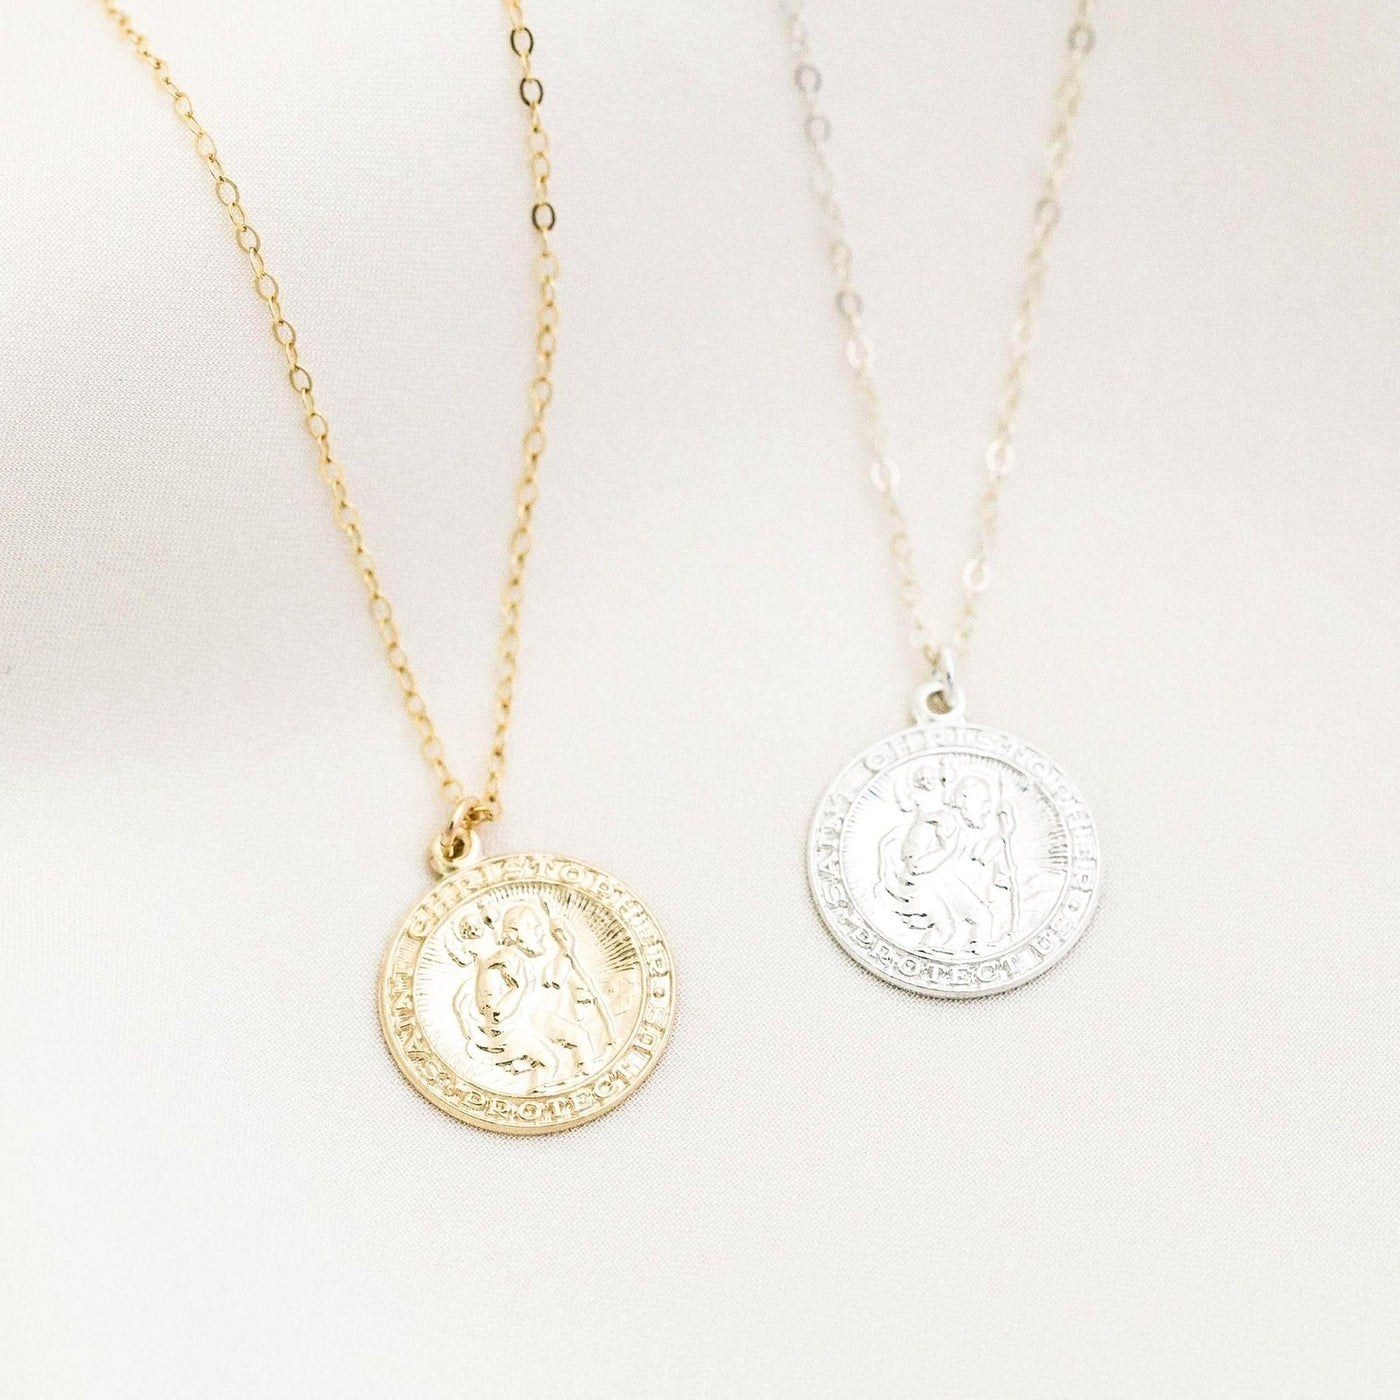 St. Christopher Medallion Necklace by Simple & Dainty Jewelry